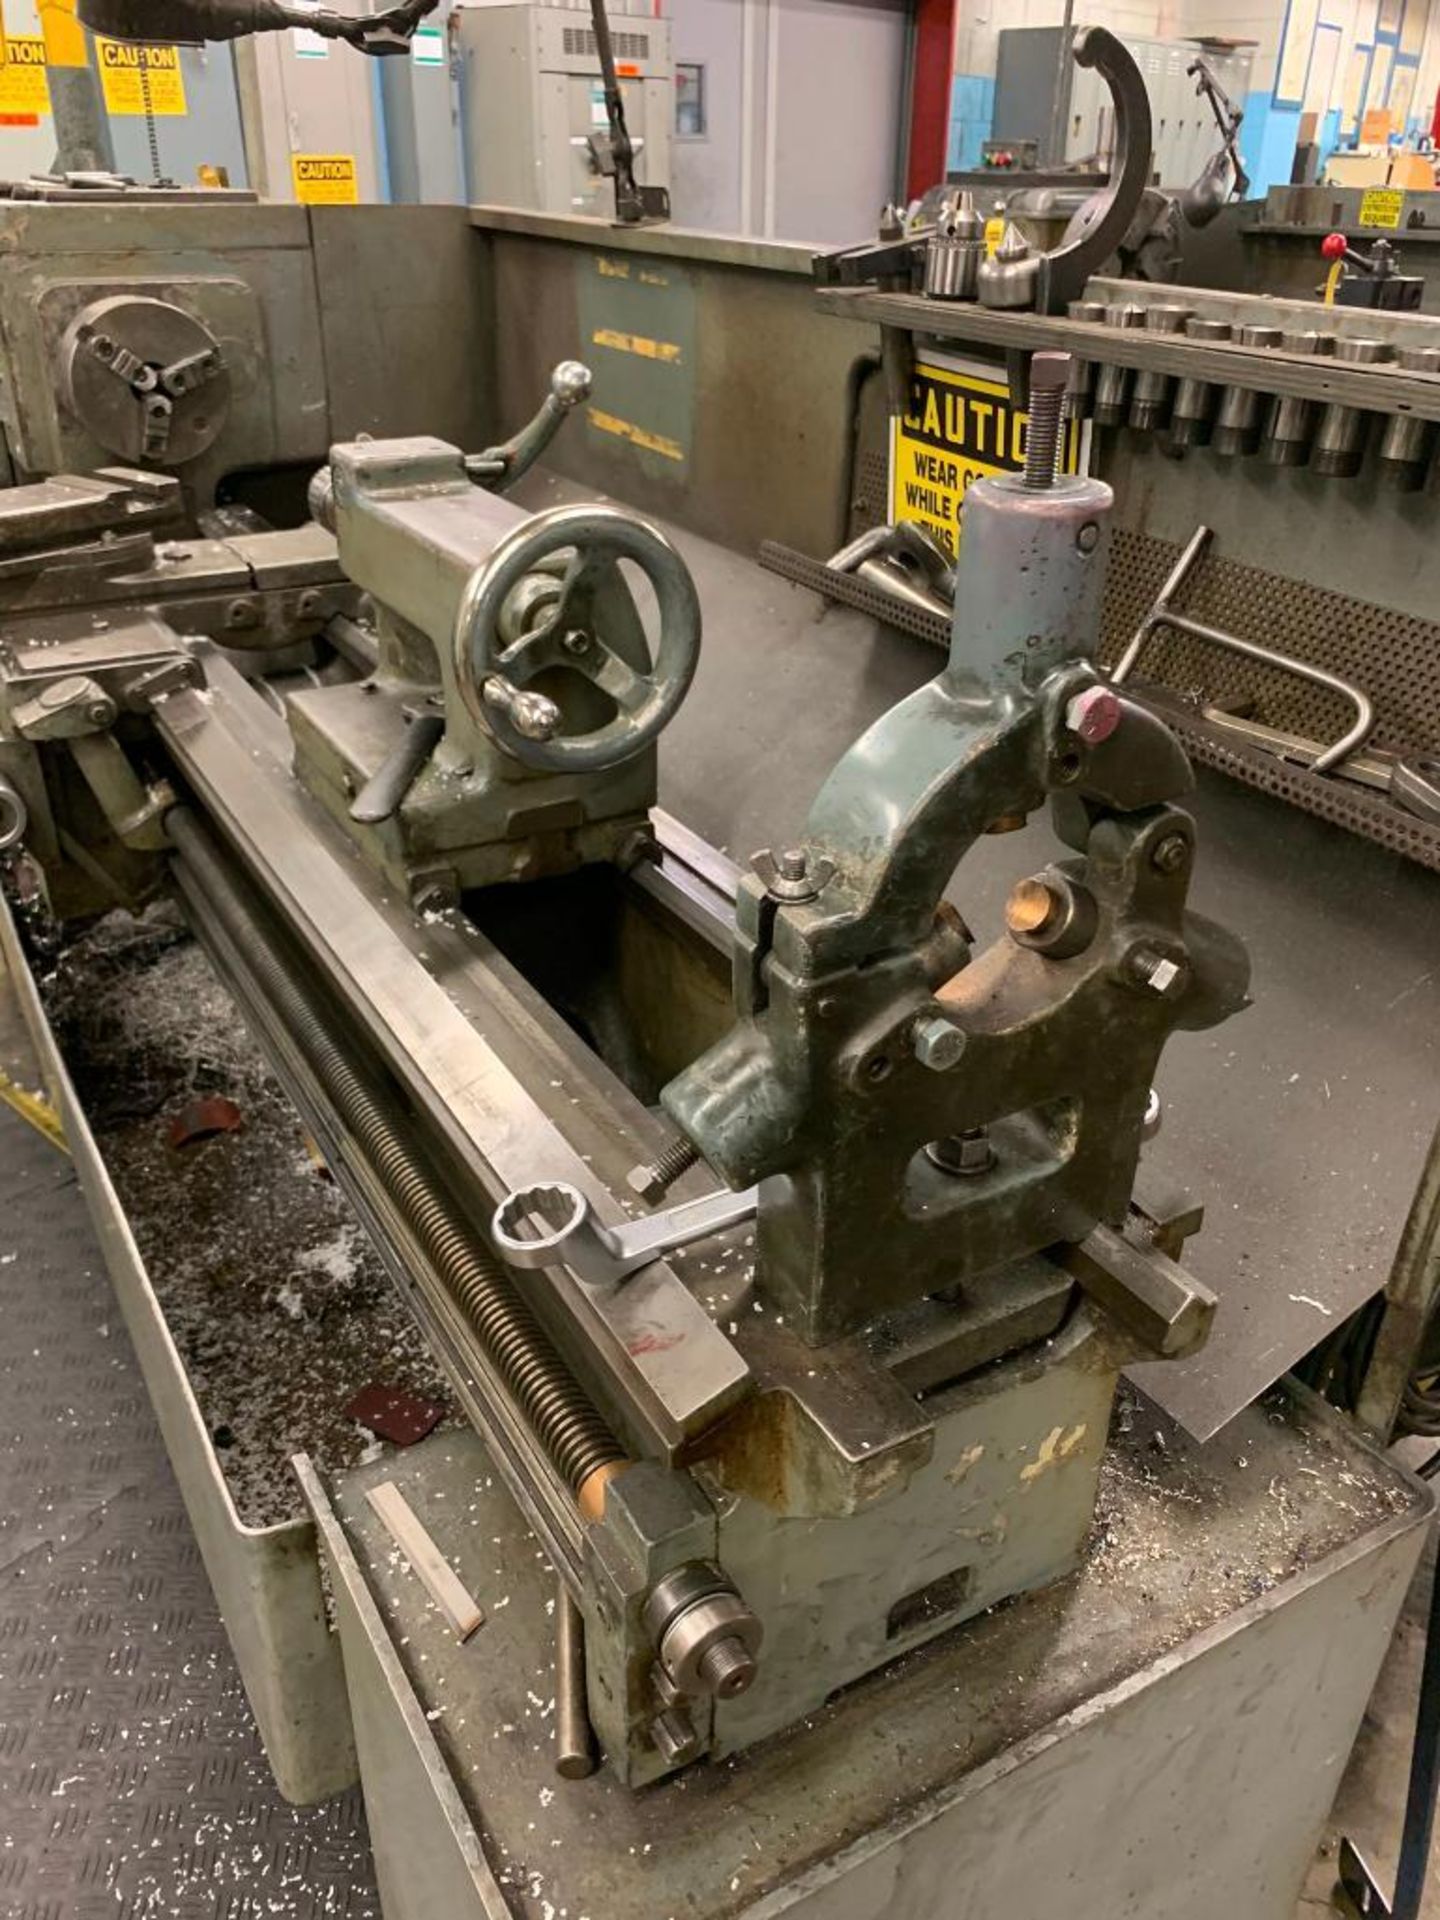 LeBlond Regal Engine Lathe, 8" 3-Jaw Chuck, Tailstock w/ Drill Chuck, Tailstock, 4" Steady Rest - Image 8 of 8